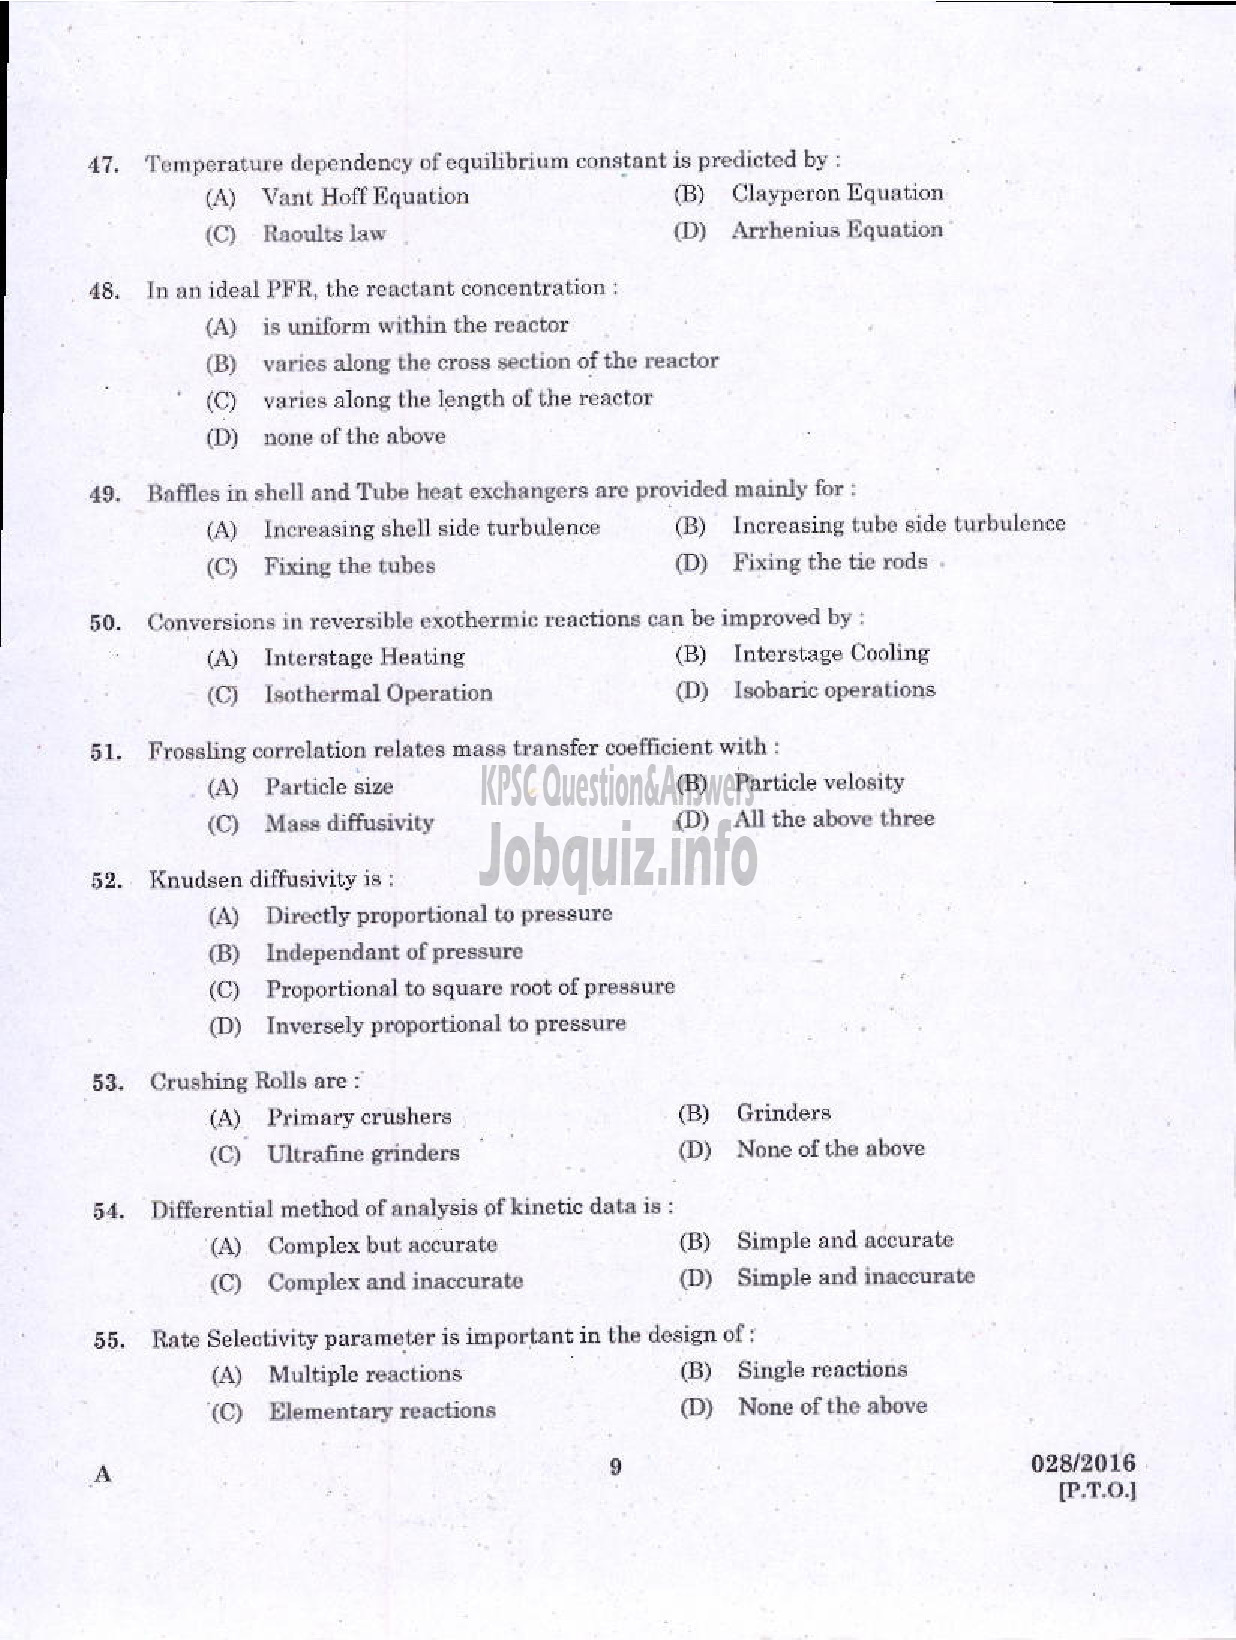 Kerala PSC Question Paper - ASSISTANT ENGINEER DIRECT/BY TRANSFER KERALA WATER AUTHORITY-7